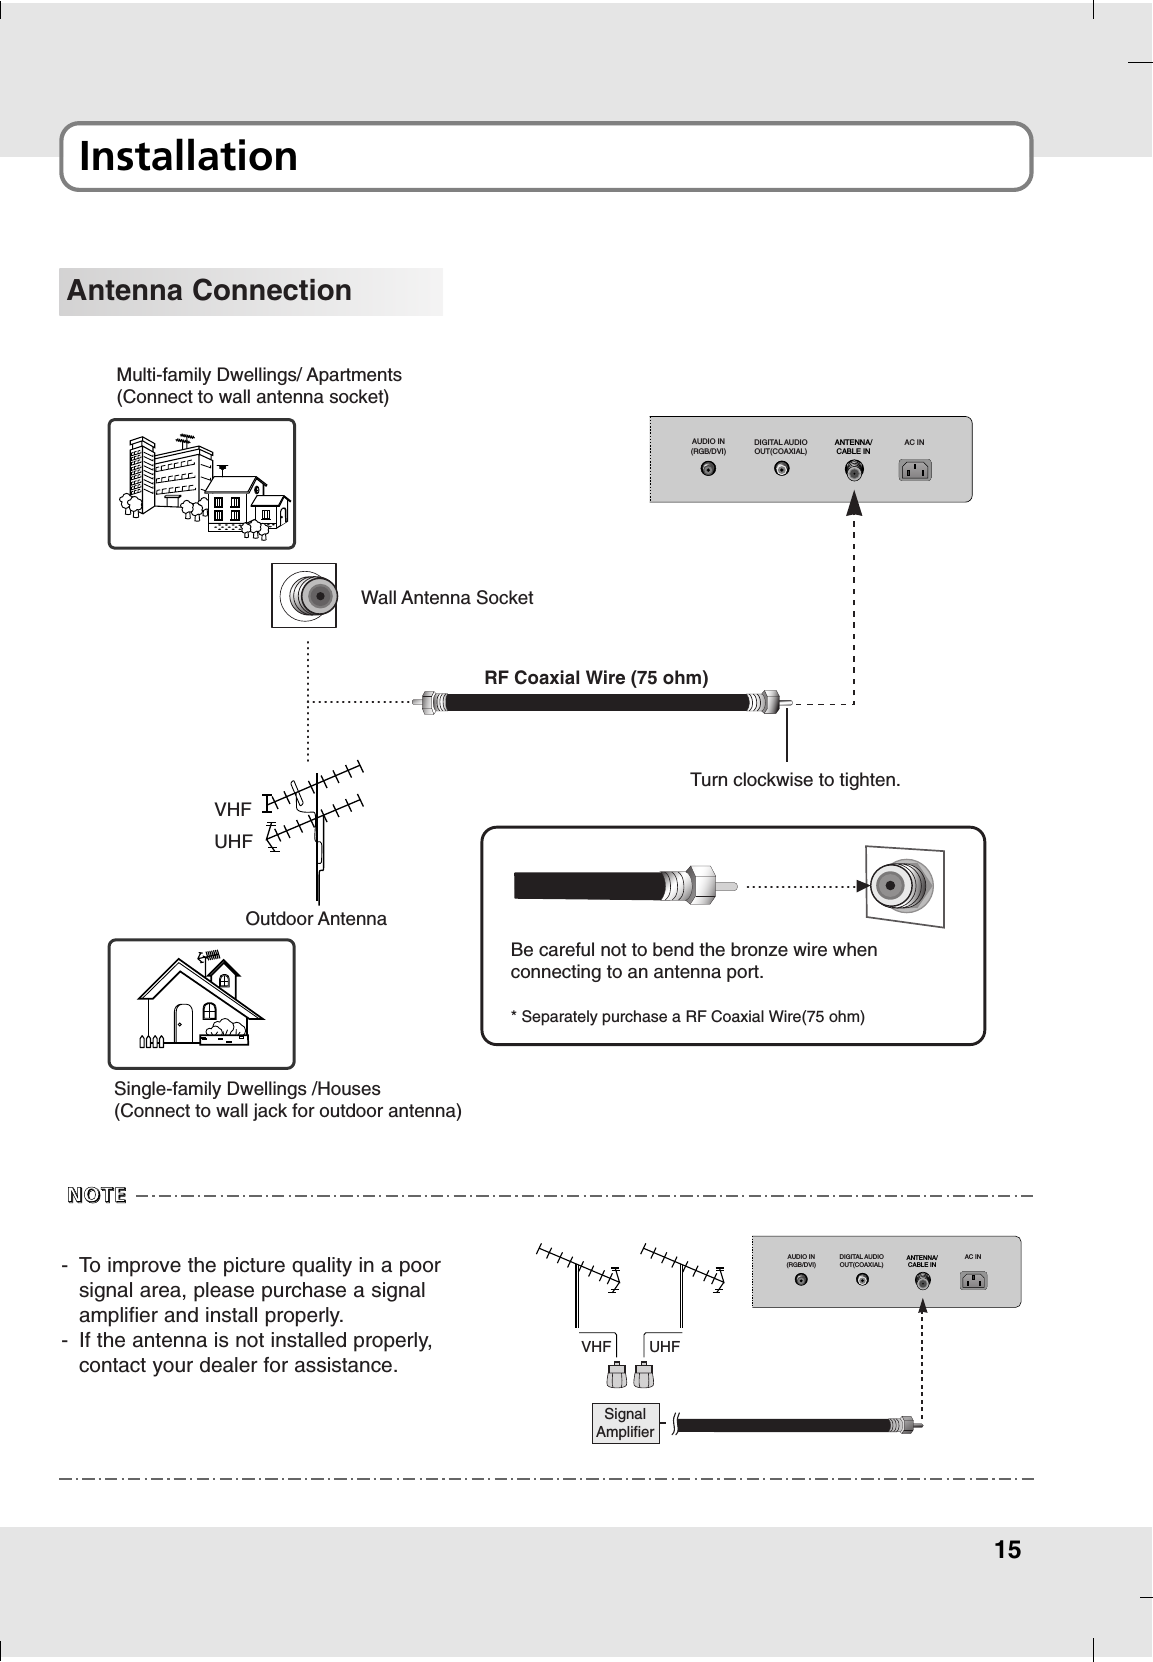 15Installation Antenna ConnectionAUDIO IN(RGB/DVI)ANTENNA/CABLE INDIGITAL AUDIOOUT(COAXIAL)AC INMulti-family Dwellings/ Apartments(Connect to wall antenna socket)Single-family Dwellings /Houses(Connect to wall jack for outdoor antenna)Wall Antenna SocketRF Coaxial Wire (75 ohm)VHFUHFOutdoor AntennaTurn clockwise to tighten.Be careful not to bend the bronze wire whenconnecting to an antenna port.* Separately purchase a RF Coaxial Wire(75 ohm)-To improve the picture quality in a poorsignal area, please purchase a signalamplifier and install properly.-If the antenna is not installed properly,contact your dealer for assistance.NNNNOOOOTTTTEEEEVHF UHFSignalAmplifierAUDIO IN(RGB/DVI)ANTENNA/CABLE INDIGITAL AUDIOOUT(COAXIAL)AC IN